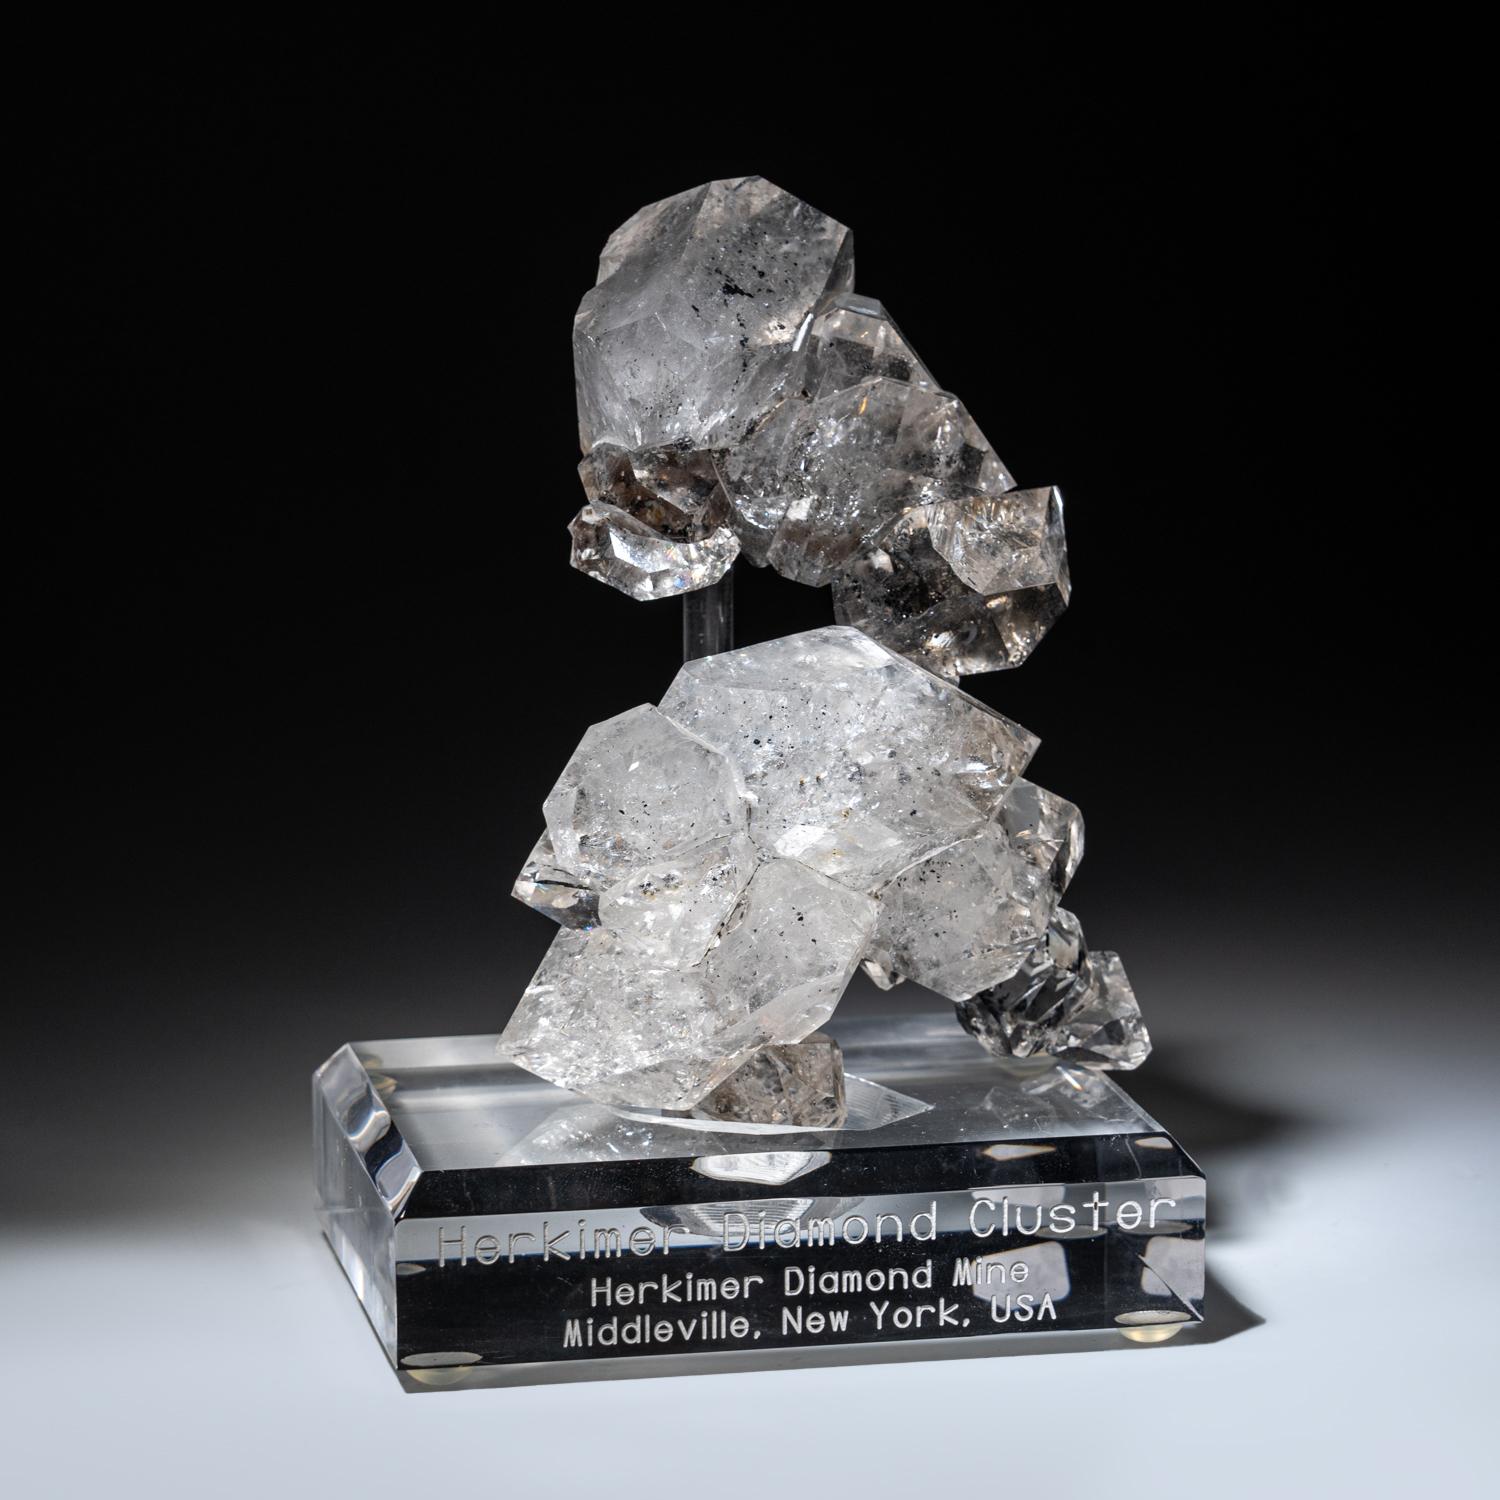 Doubly-terminated, stacked cluster of Herkimer Quartz crystals from Herkimer County, New York. This aesthetic specimen, translucent to transparent 3d diamond shaped cluster, is in pristine condition. This piece has great transparency with minor